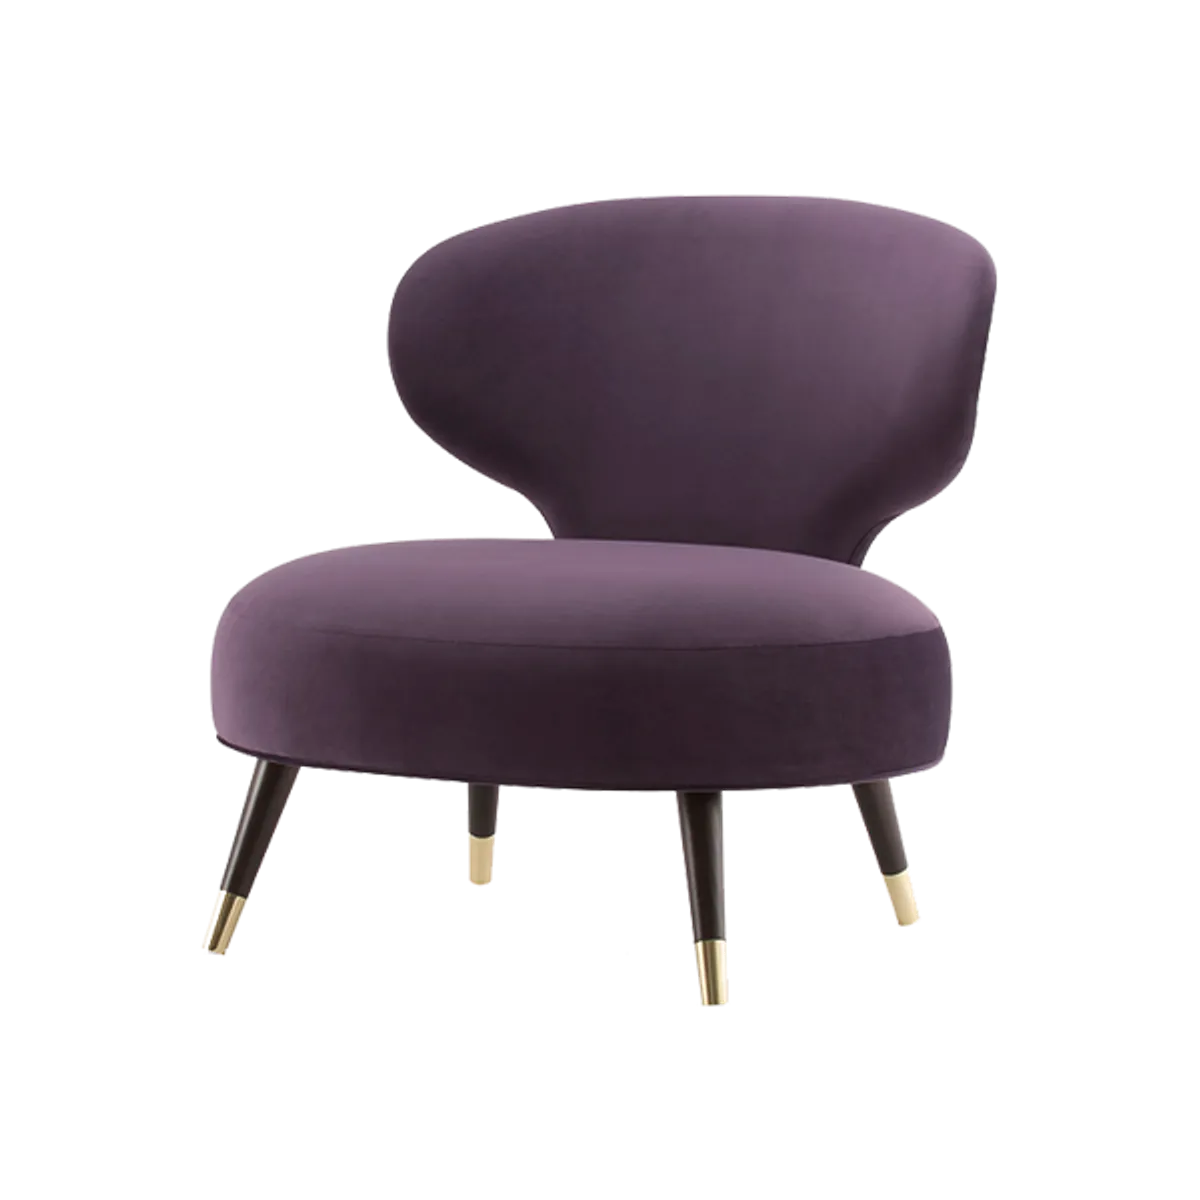 Web Sylvia Lounge Chair Purple Upholstery And Wooden Legs Hotel Furniture By Insideoutcontracts